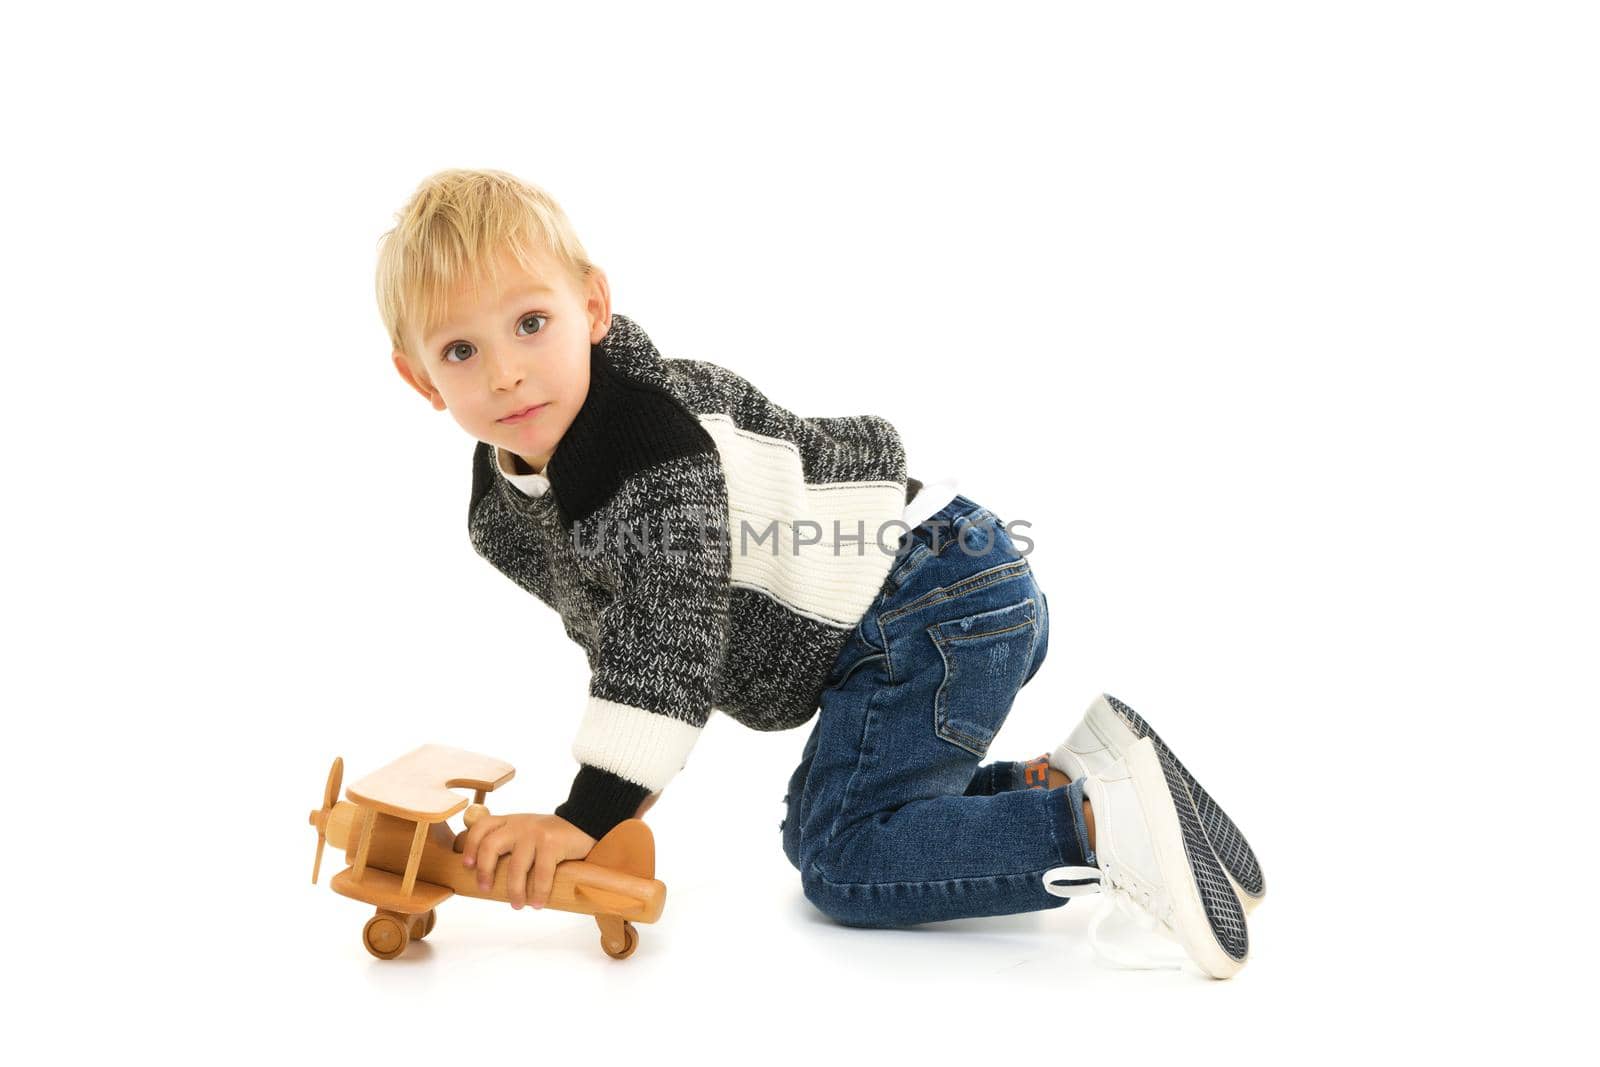 Happy kid boy plays with wooden toy airplane.Isolated on white background.